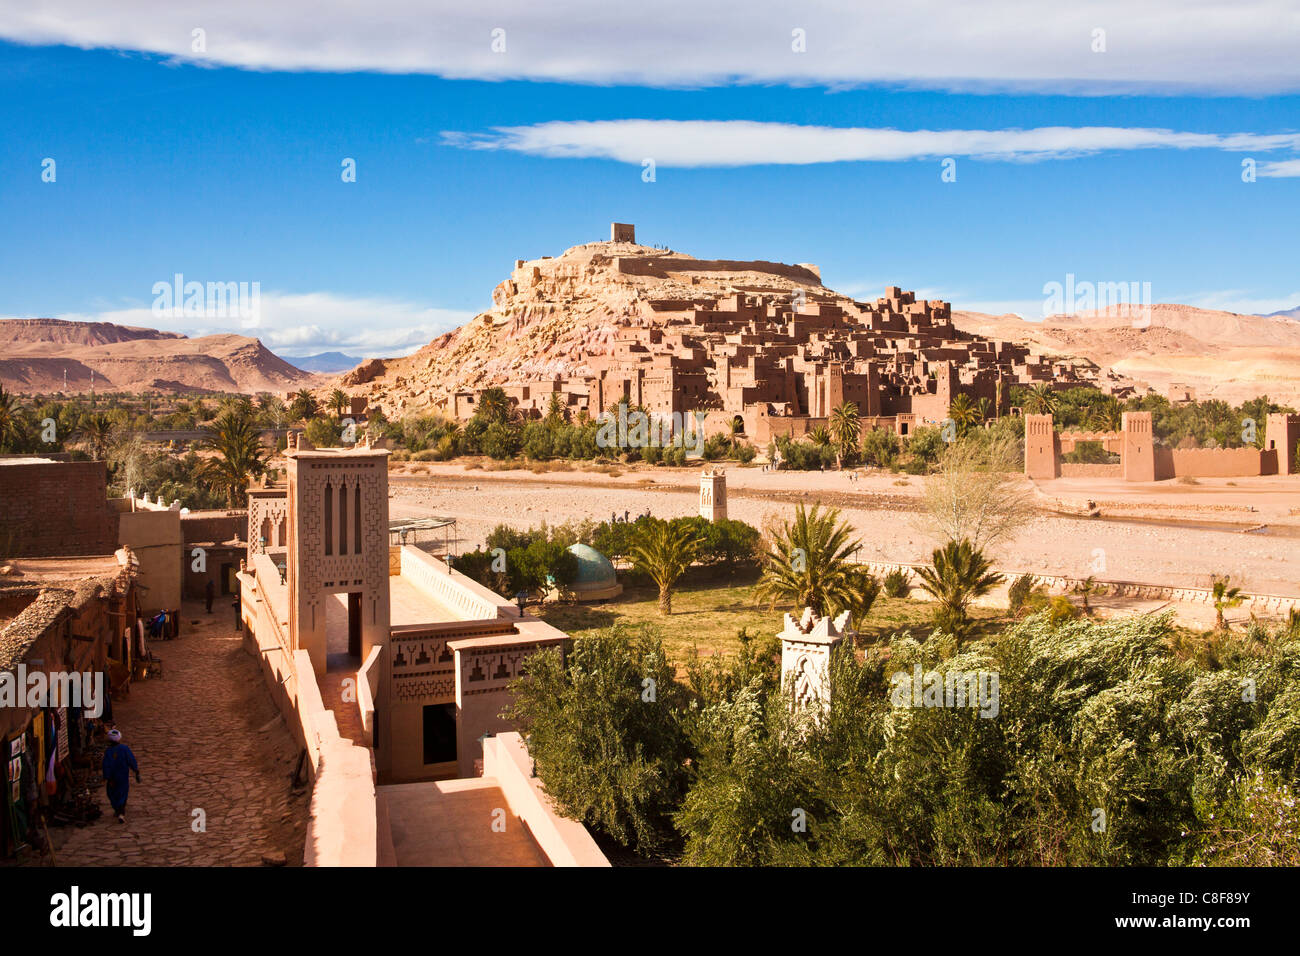 Morocco, North Africa, Africa, Southern Morocco, atlas, mountains, mountains, Ait Ben Haddou, Kasbah, world cultural heritage, Stock Photo